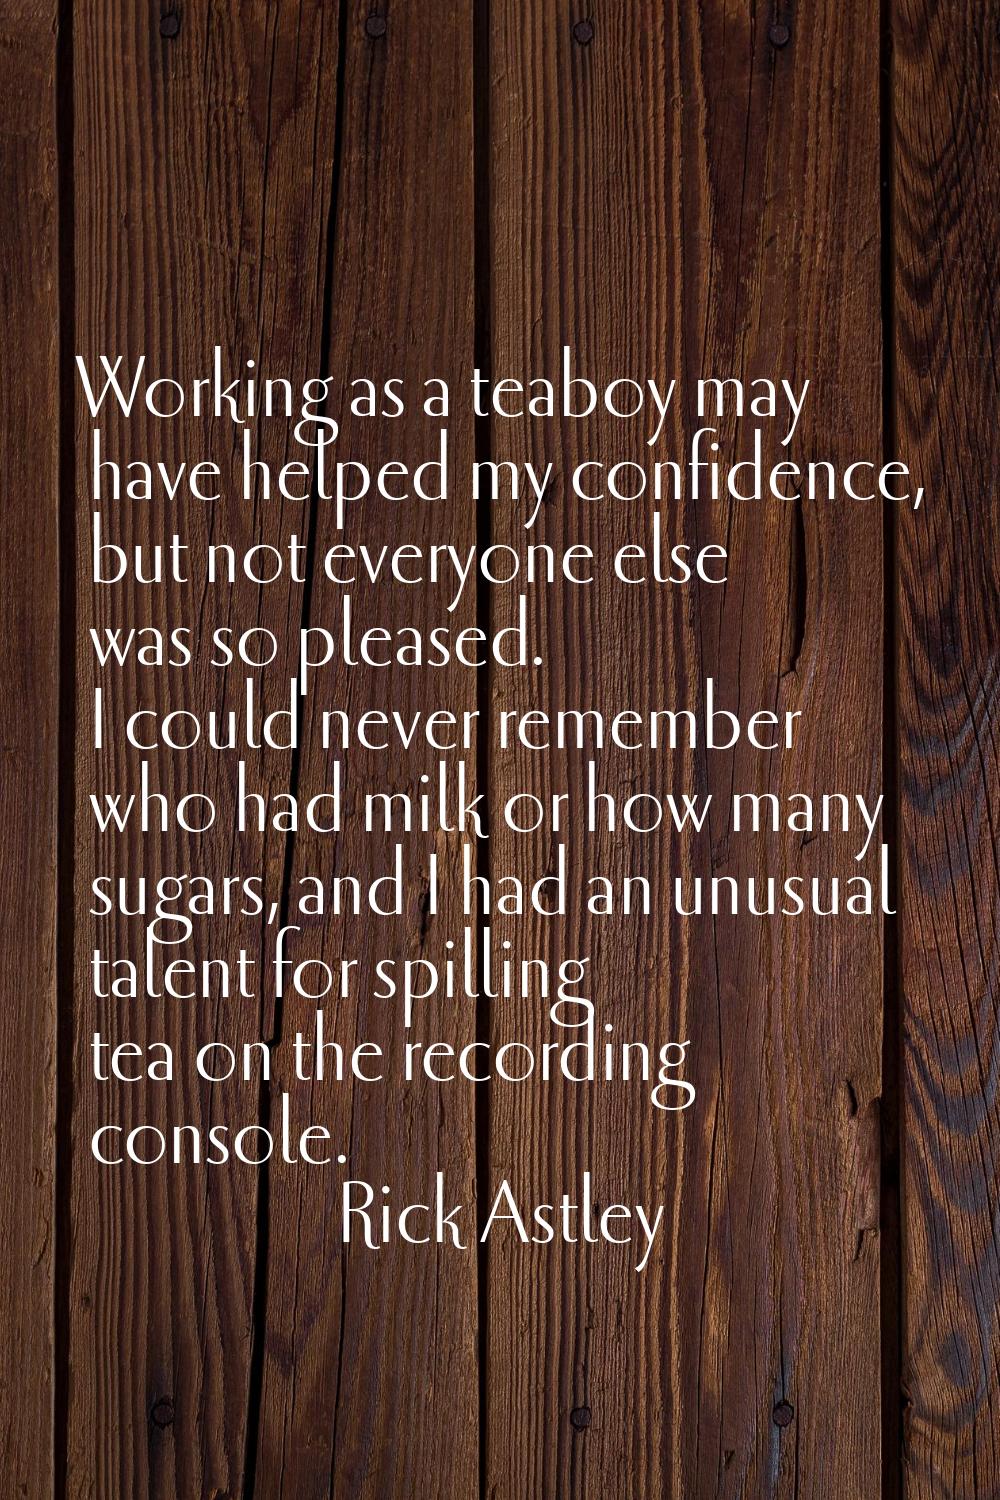 Working as a teaboy may have helped my confidence, but not everyone else was so pleased. I could ne